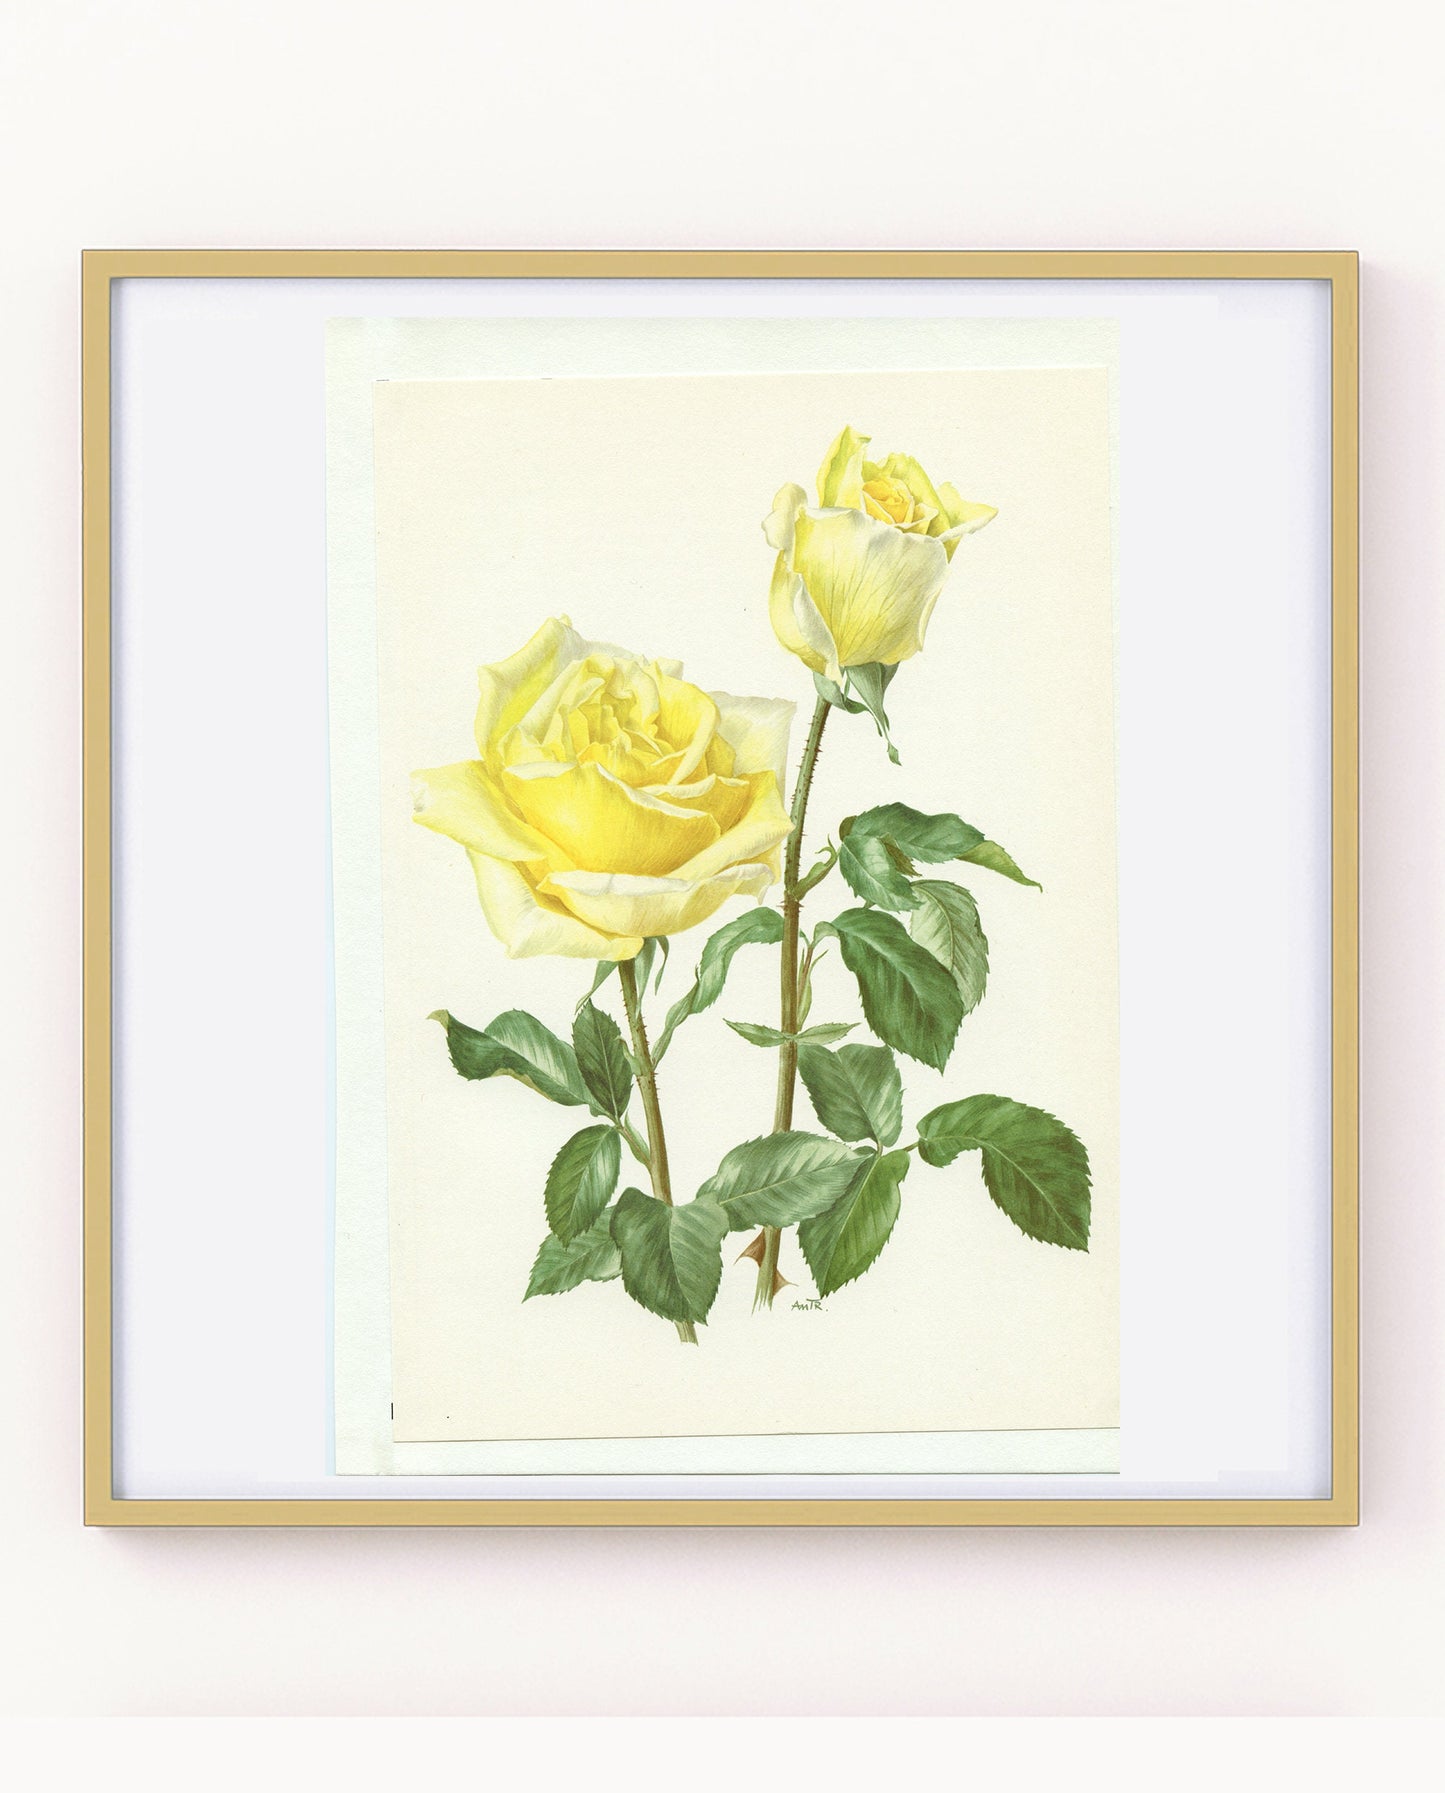 Pastel yellow Claudius rose poster from 1967. Vintage Botanical art French country decor. Antique Roses art Gardener gift. Floral wall decor